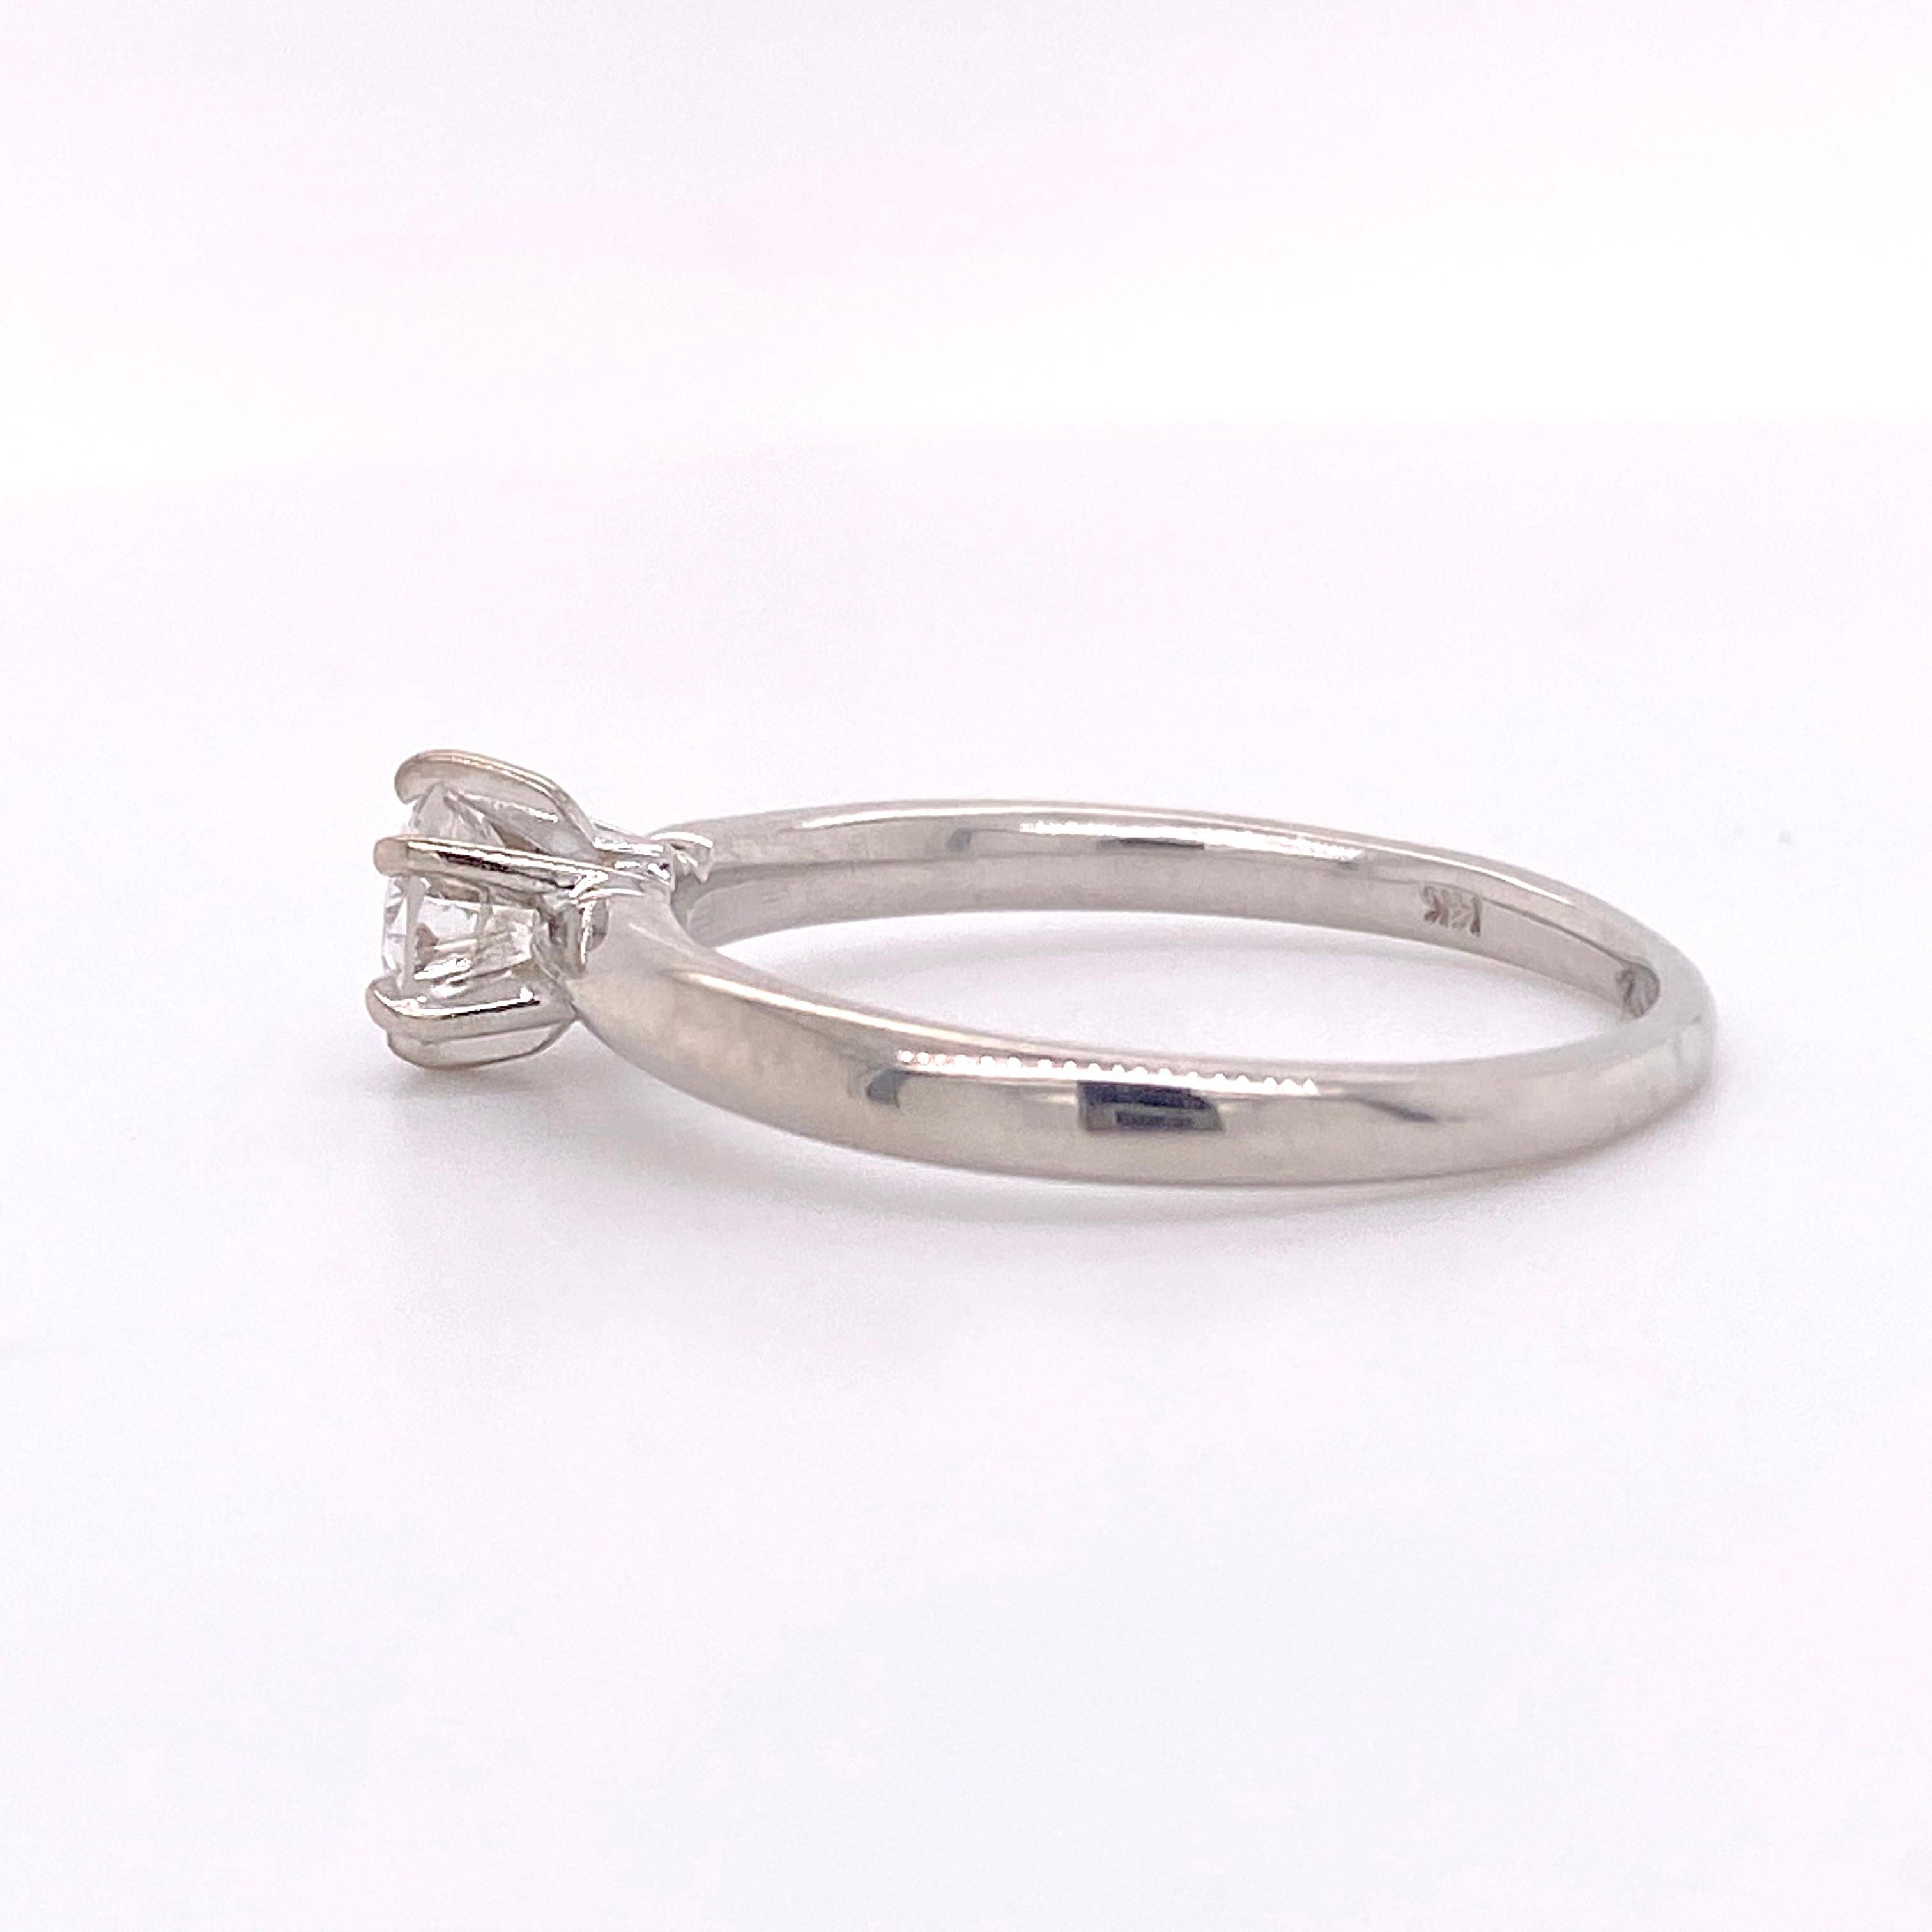 This is a 14 karat white gold solitaire ring with a .65 carat round brilliant cut diamond. The solitaire is the perfect engagement ring for any woman! The six prongs hold the diamond very securely and look great paired with a diamond wedding band or